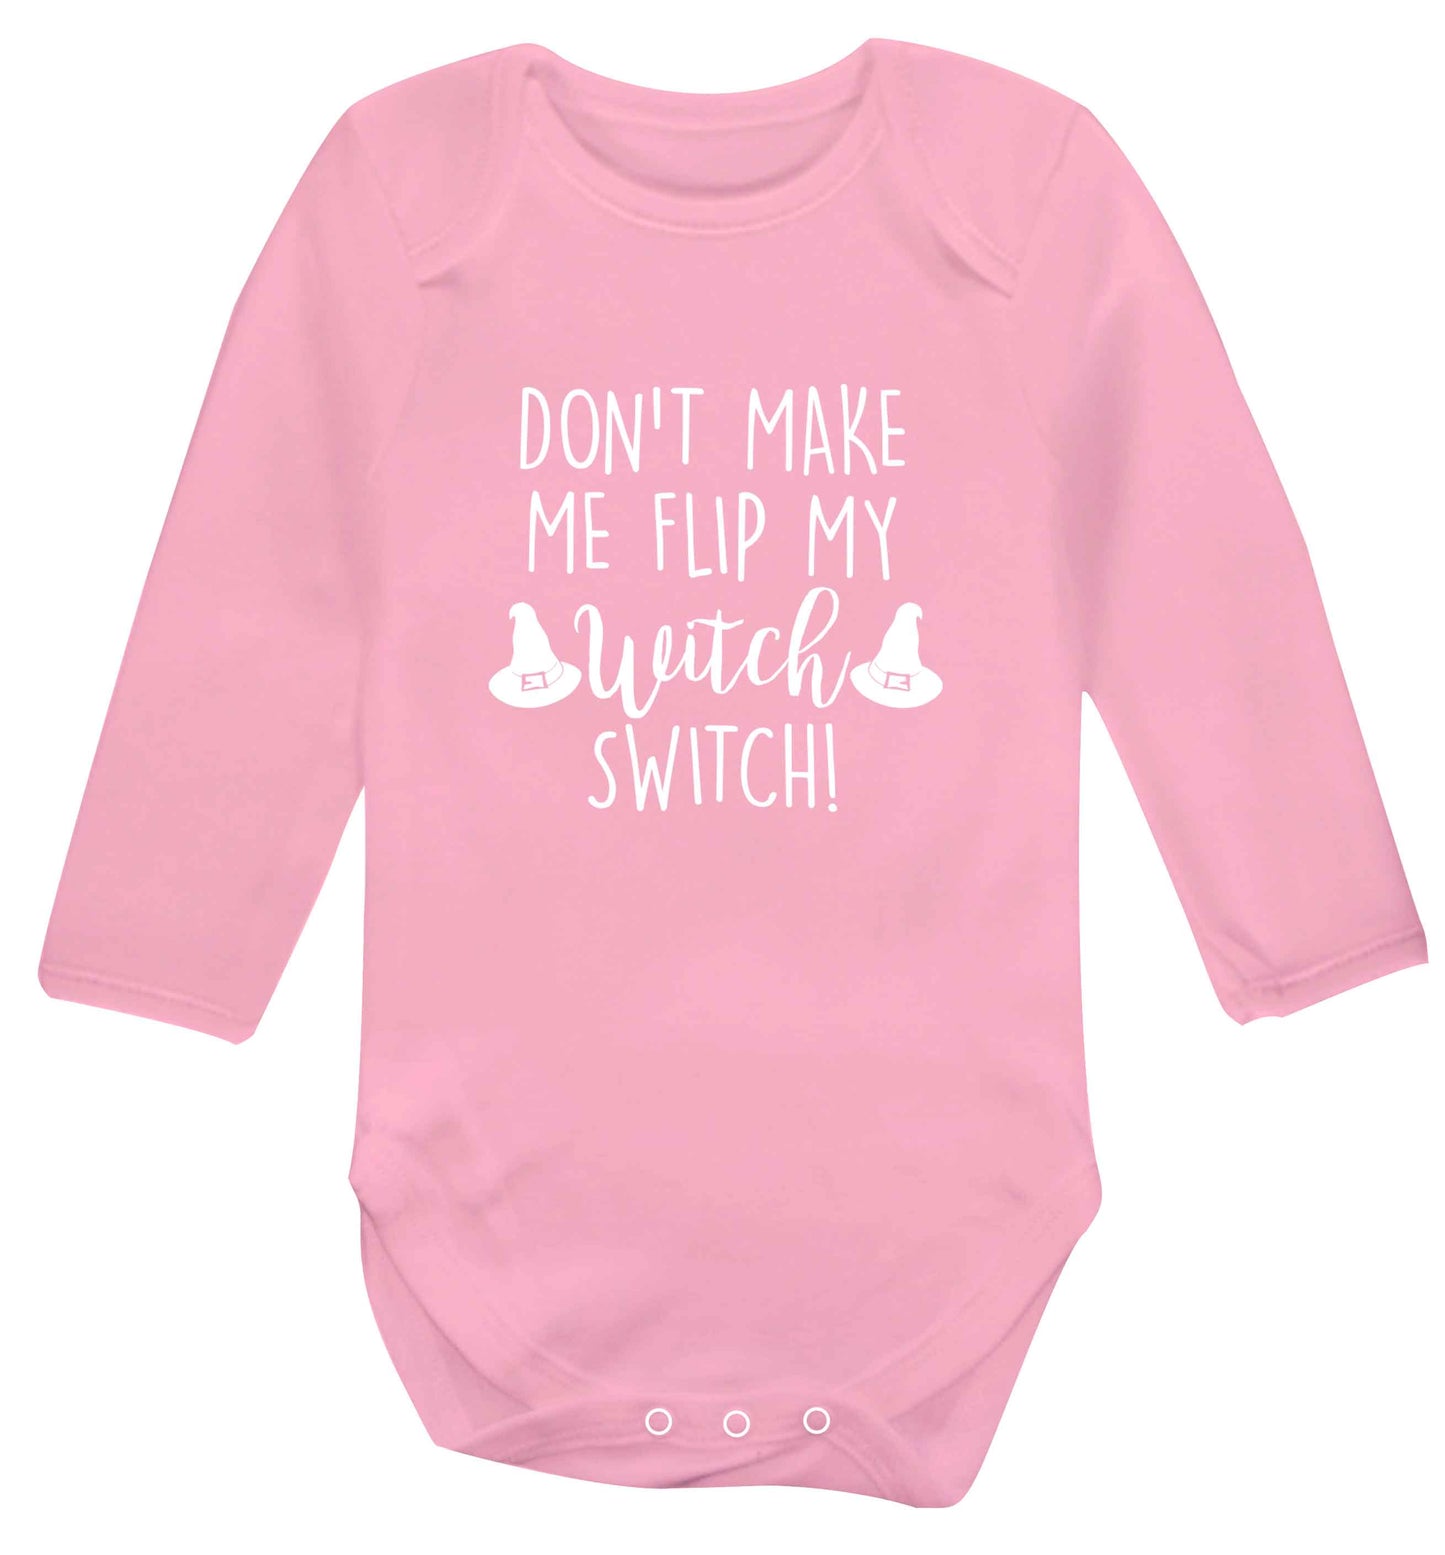 Don't make me flip my witch switch baby vest long sleeved pale pink 6-12 months